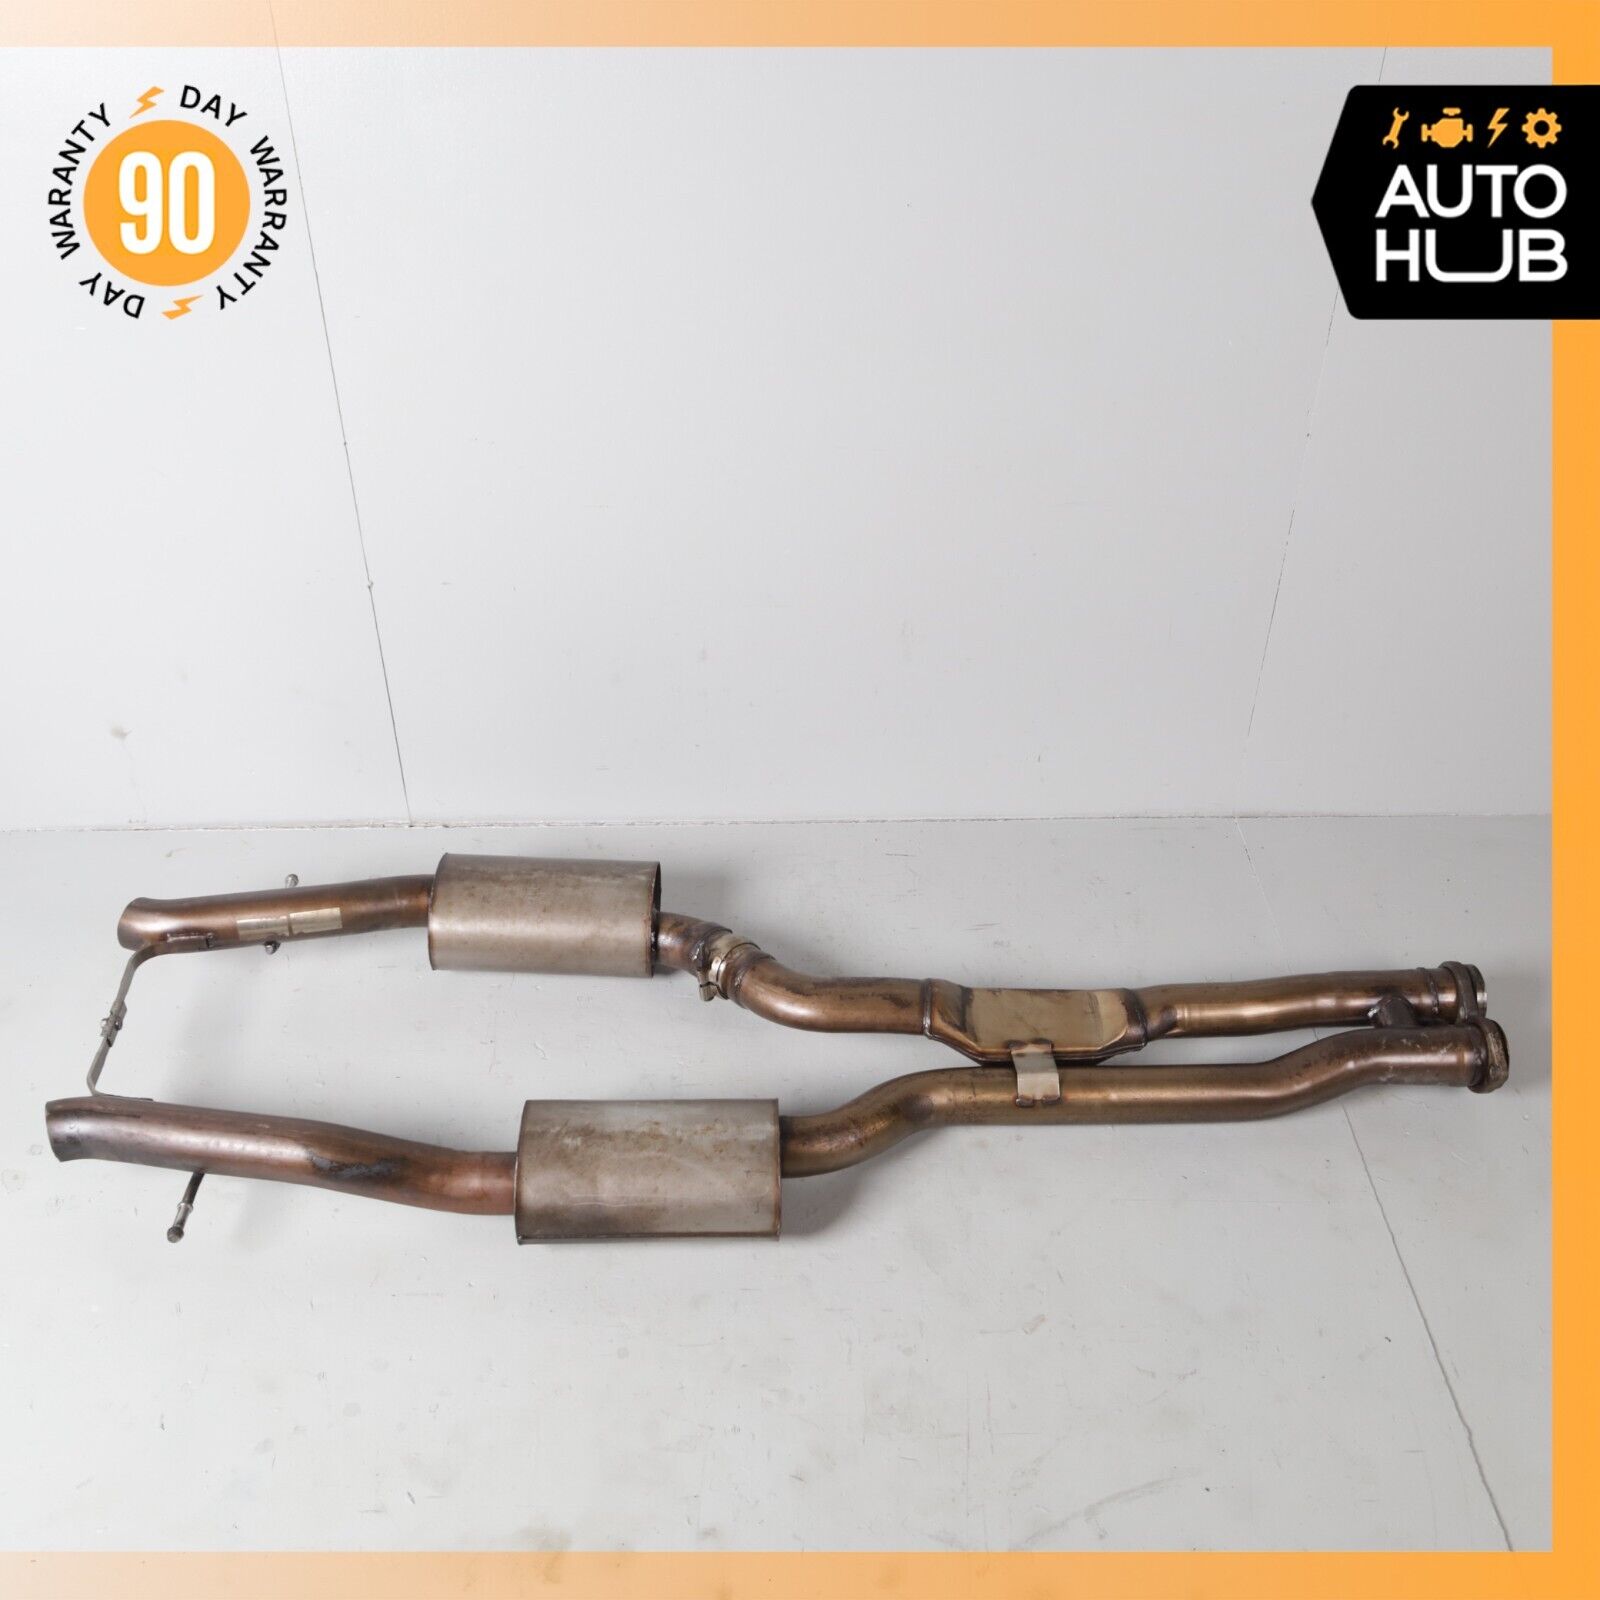 03-06 Mercedes W220 S55 AMG Exhaust Pipes Central Resonator Mid Silencer Set OEM